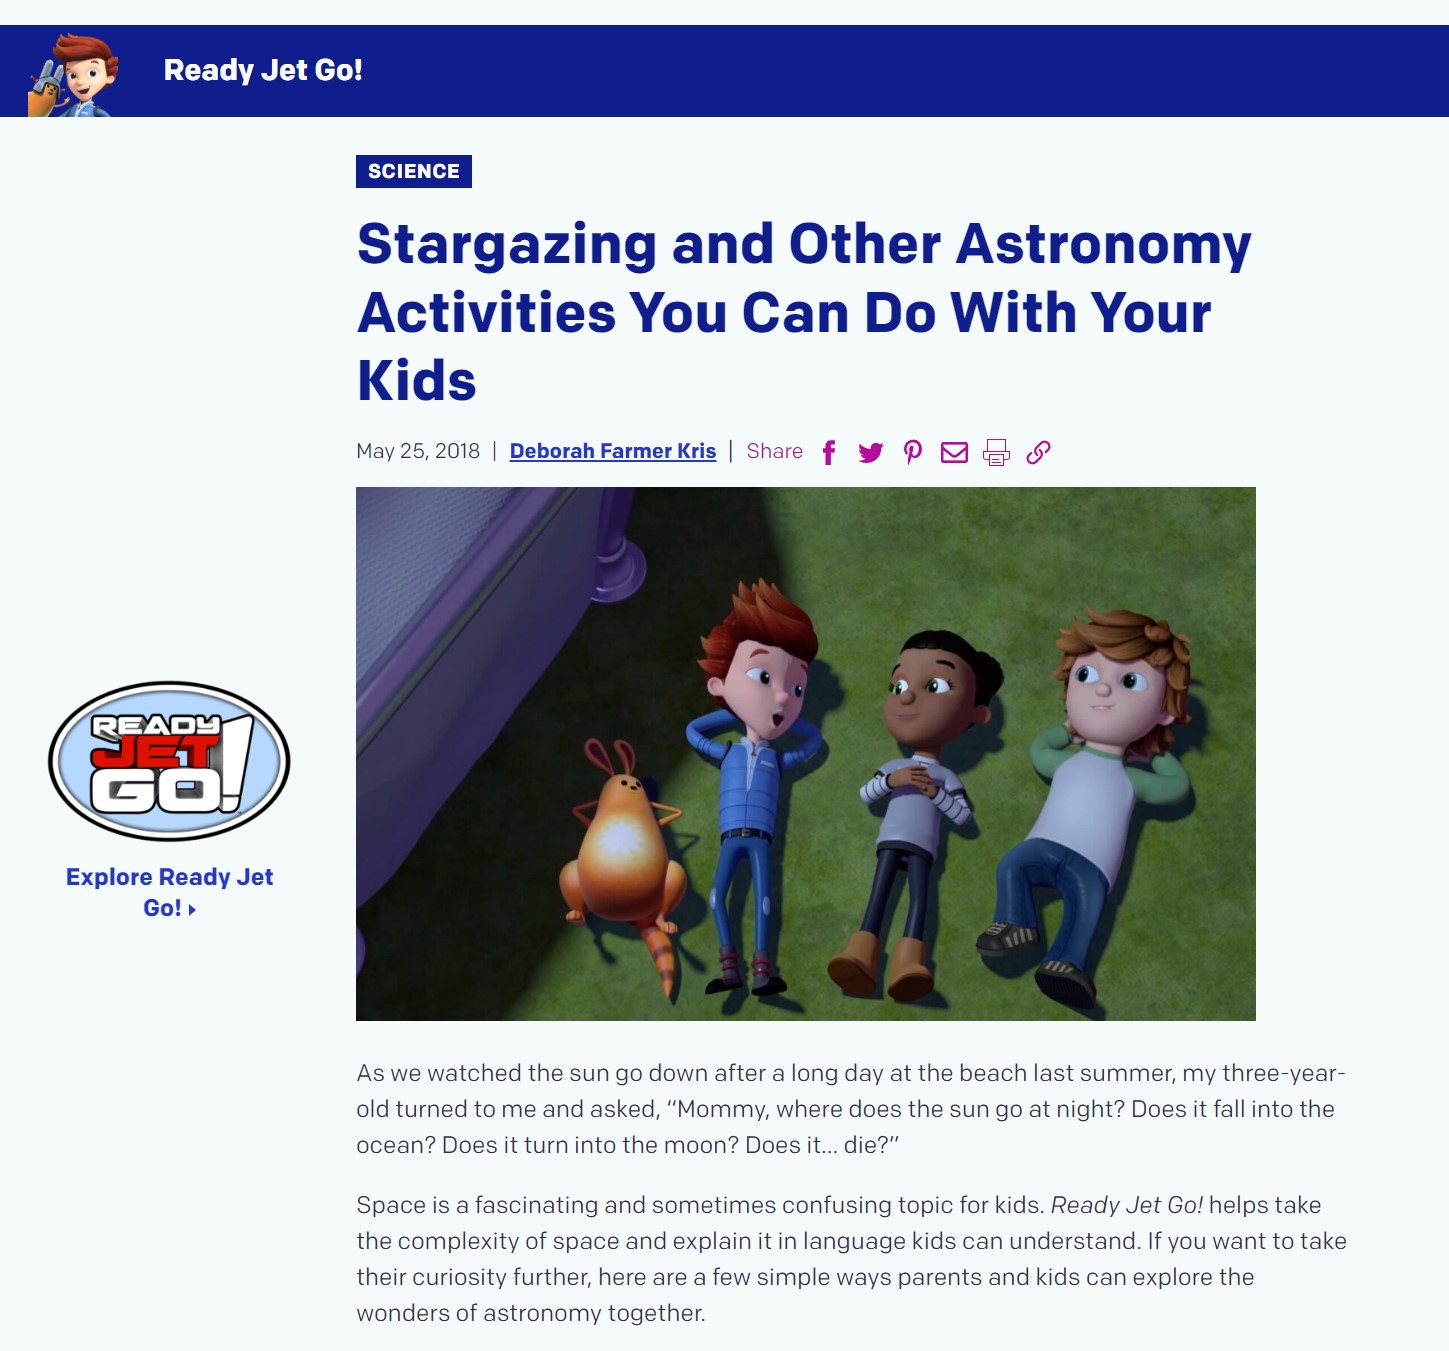 Stargazing and Other Astronomy Activities You Can Do With Your Kids